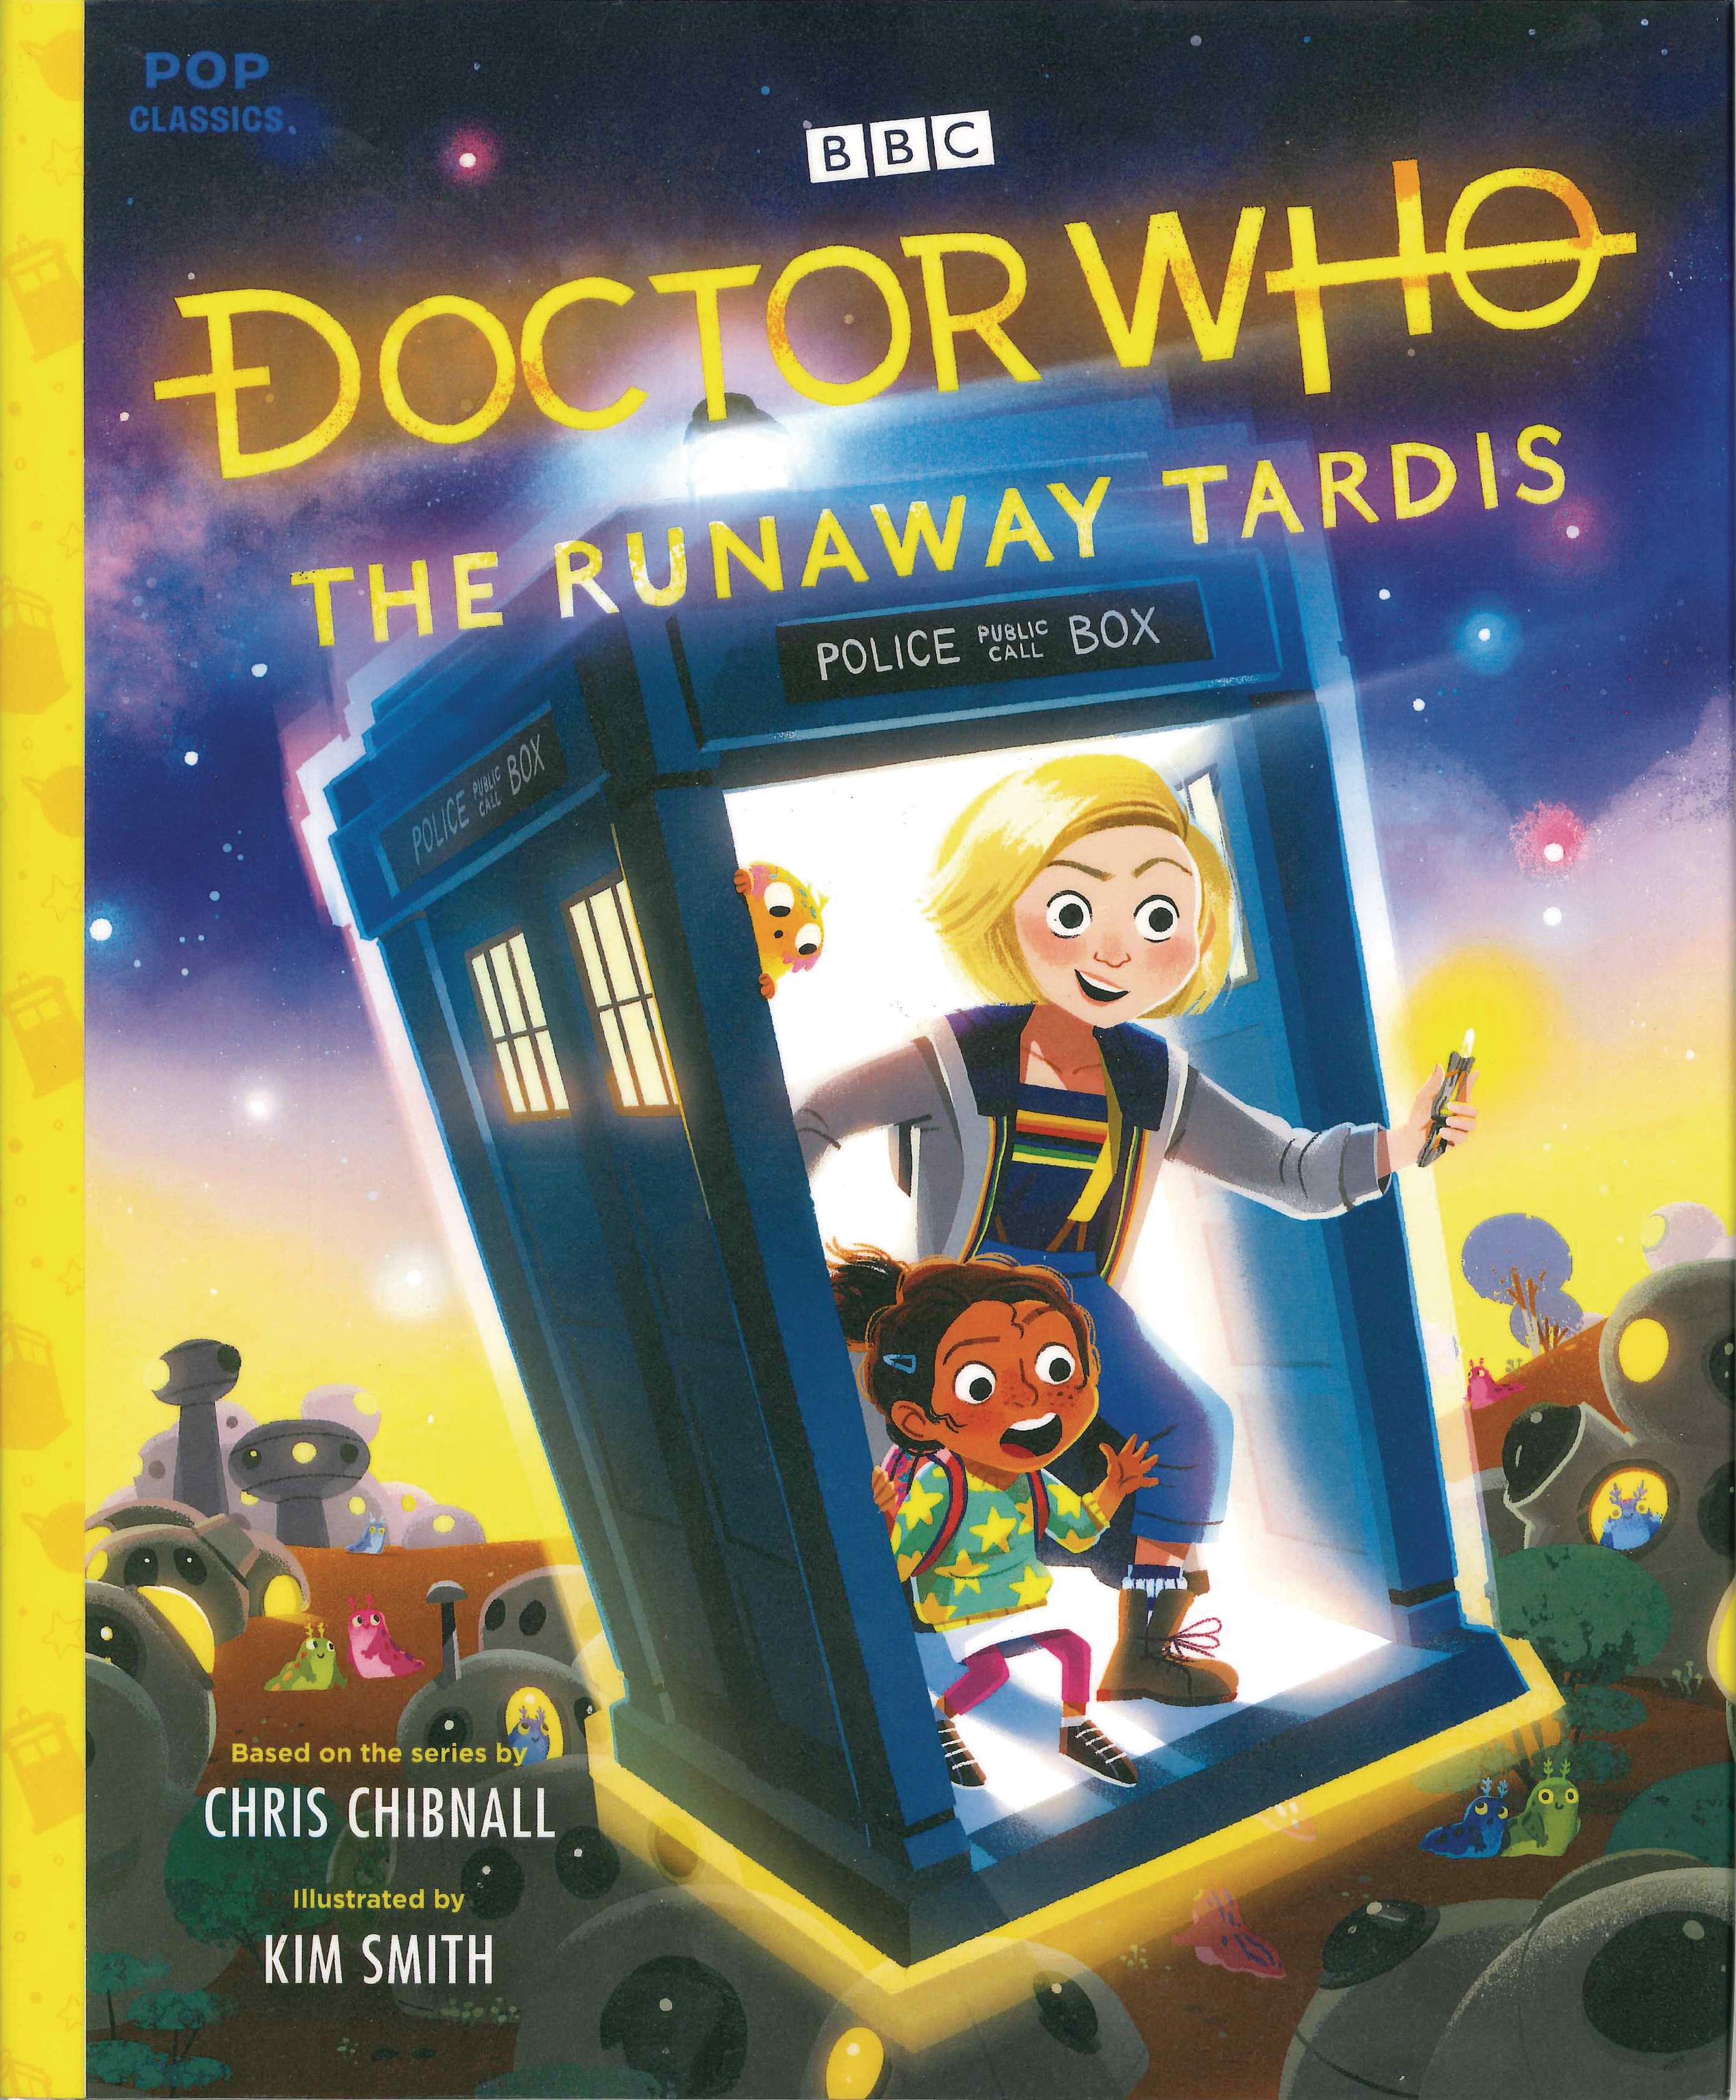 Doctor Who Runaway Tardis Pop Classic Illustrated Storybook Hardcover